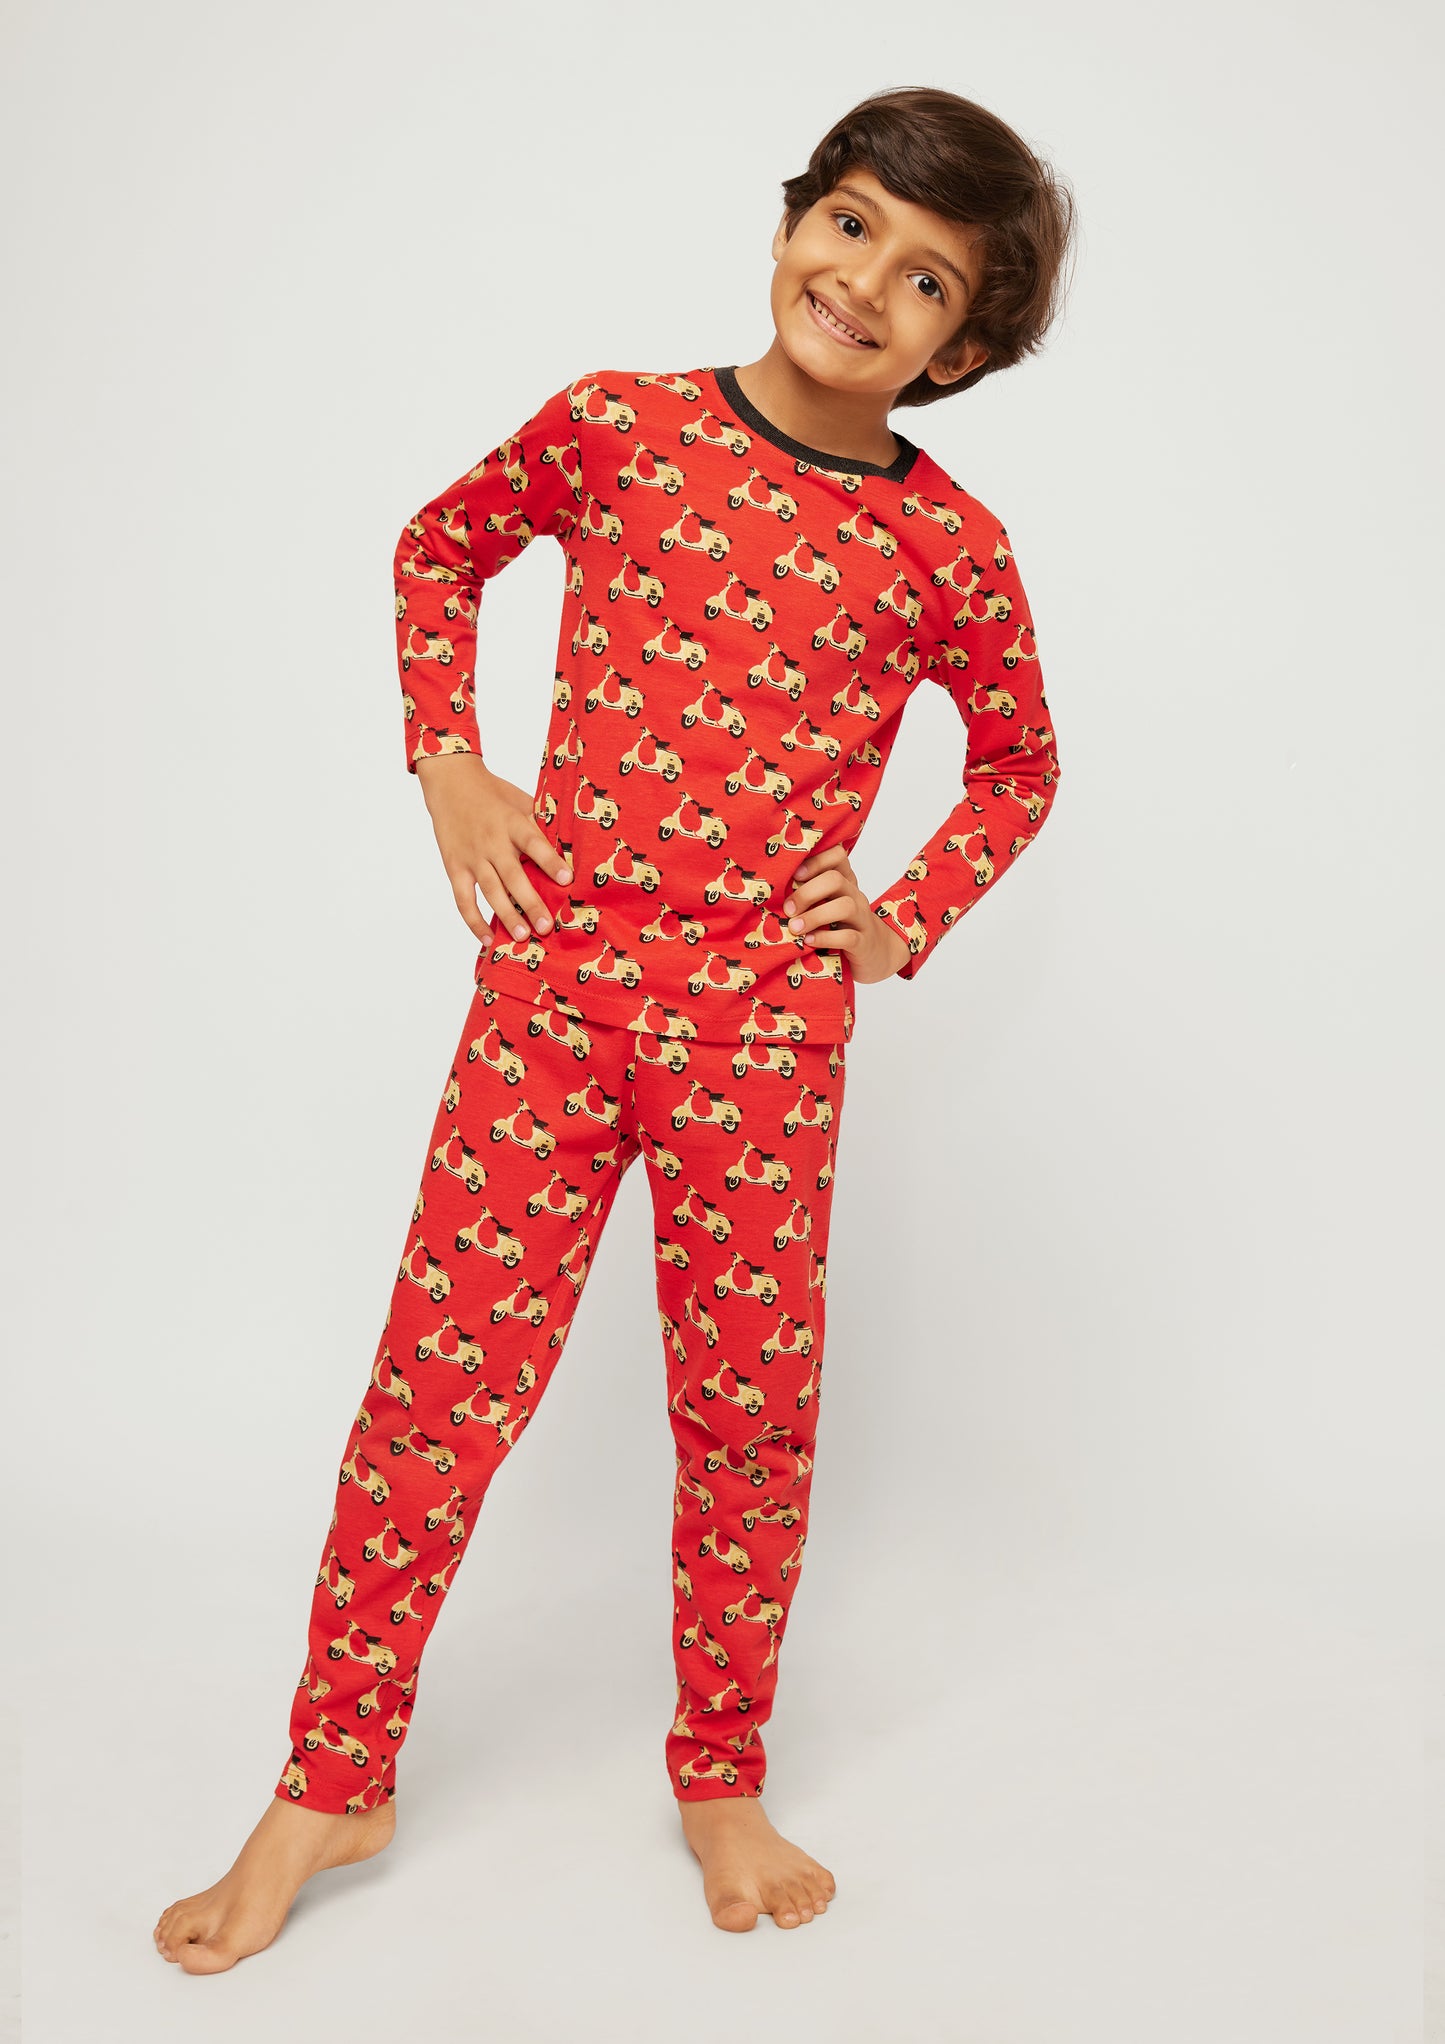 RED, YELLOW AND BLACK SCOOTER PRINT LONG SLEEVE PAJAMA SET